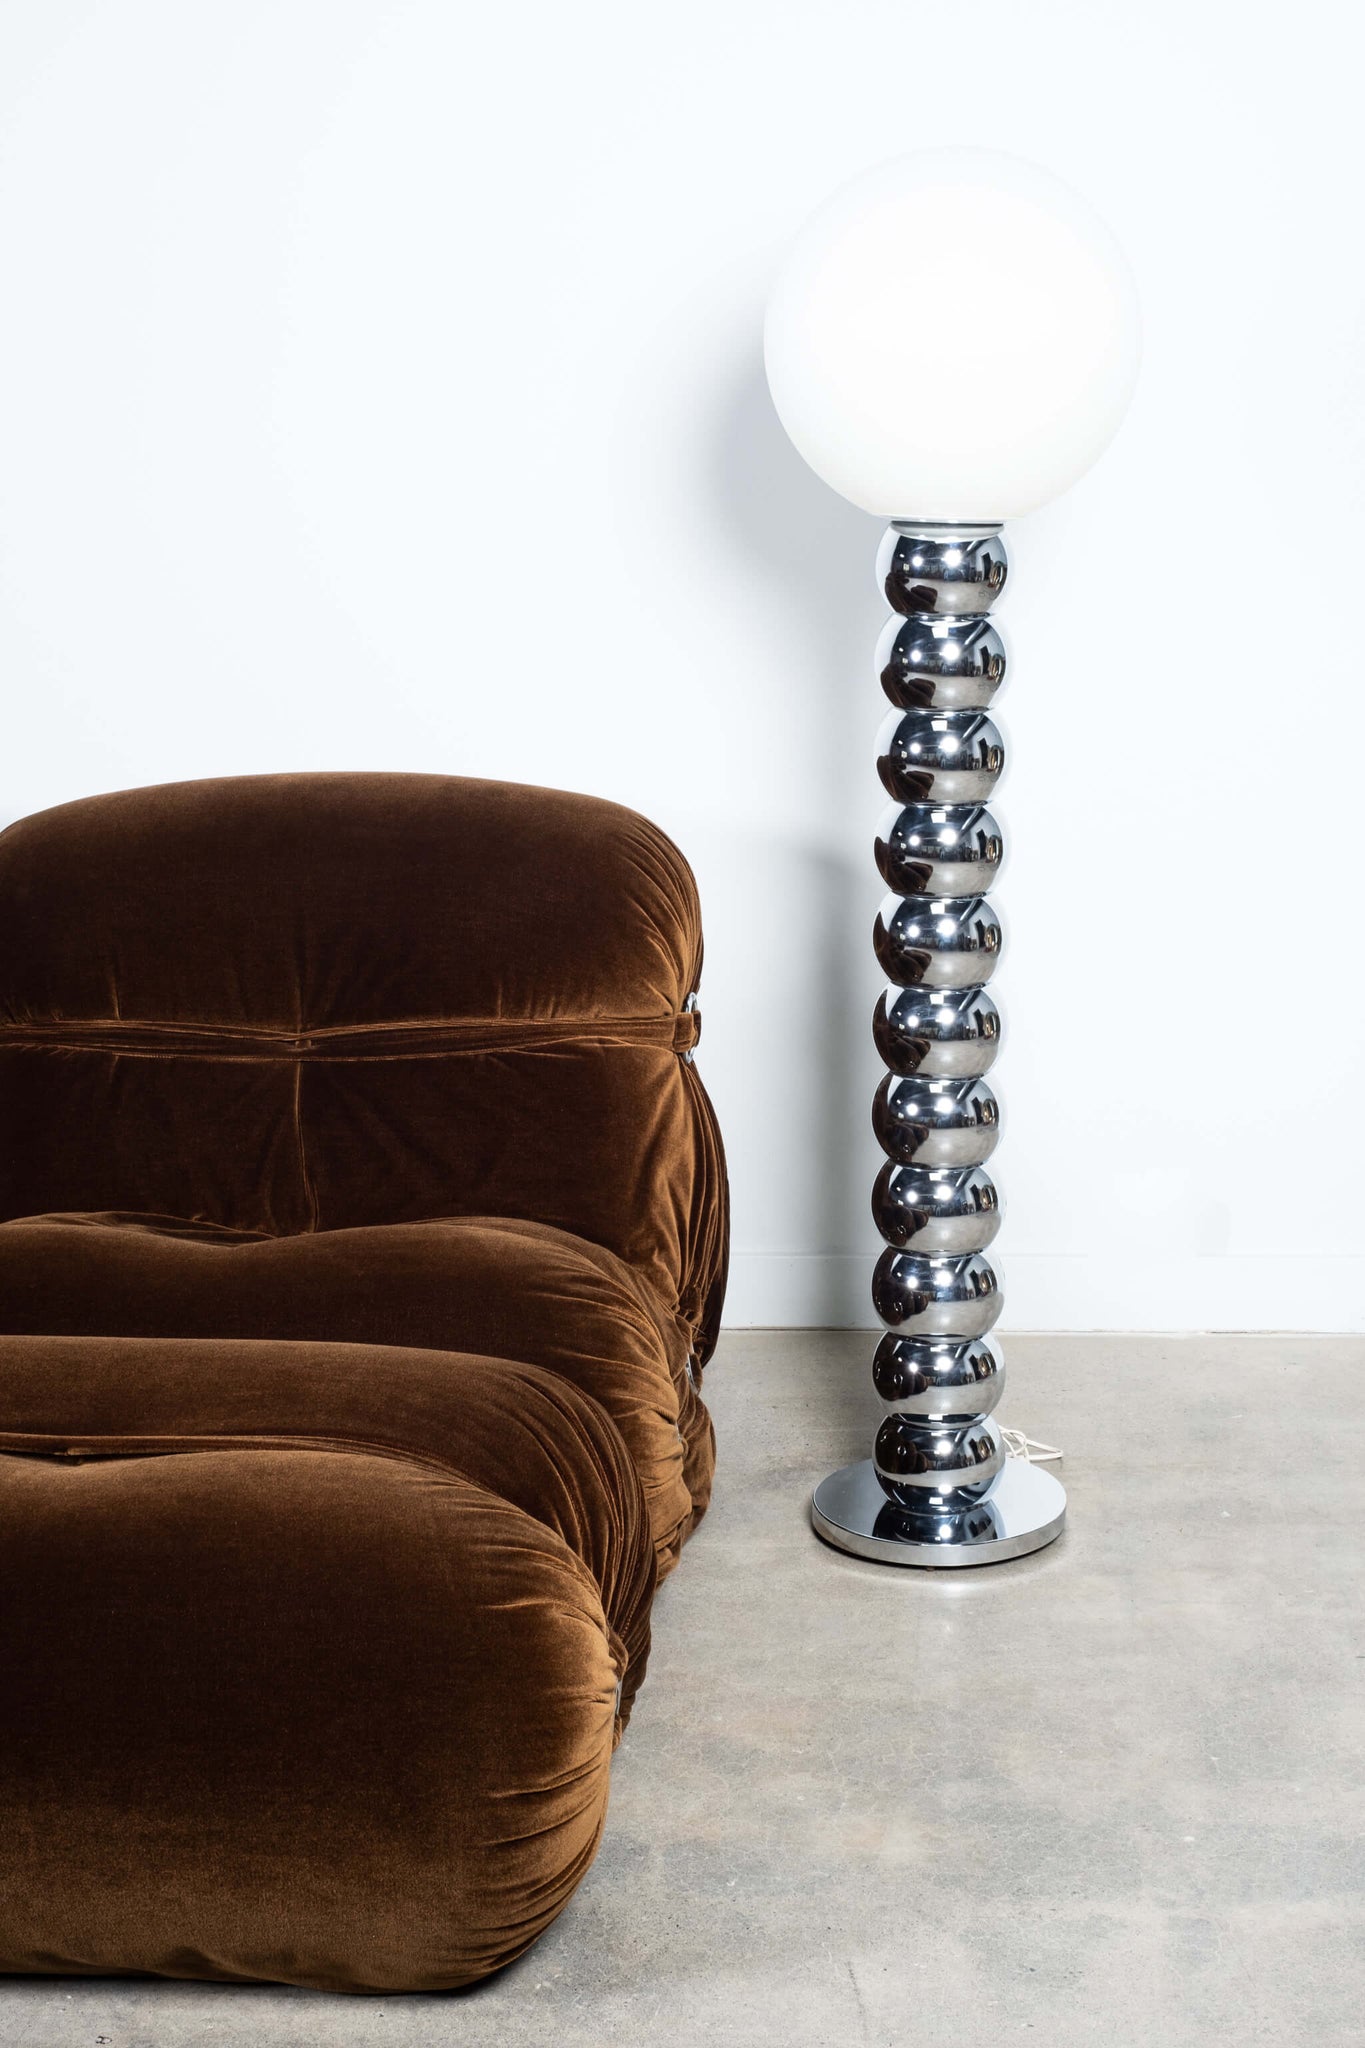 Vintage 1960s Chrome Stacked Ball Floor Lamp, shown with brown velvet lounge chair and ottoman